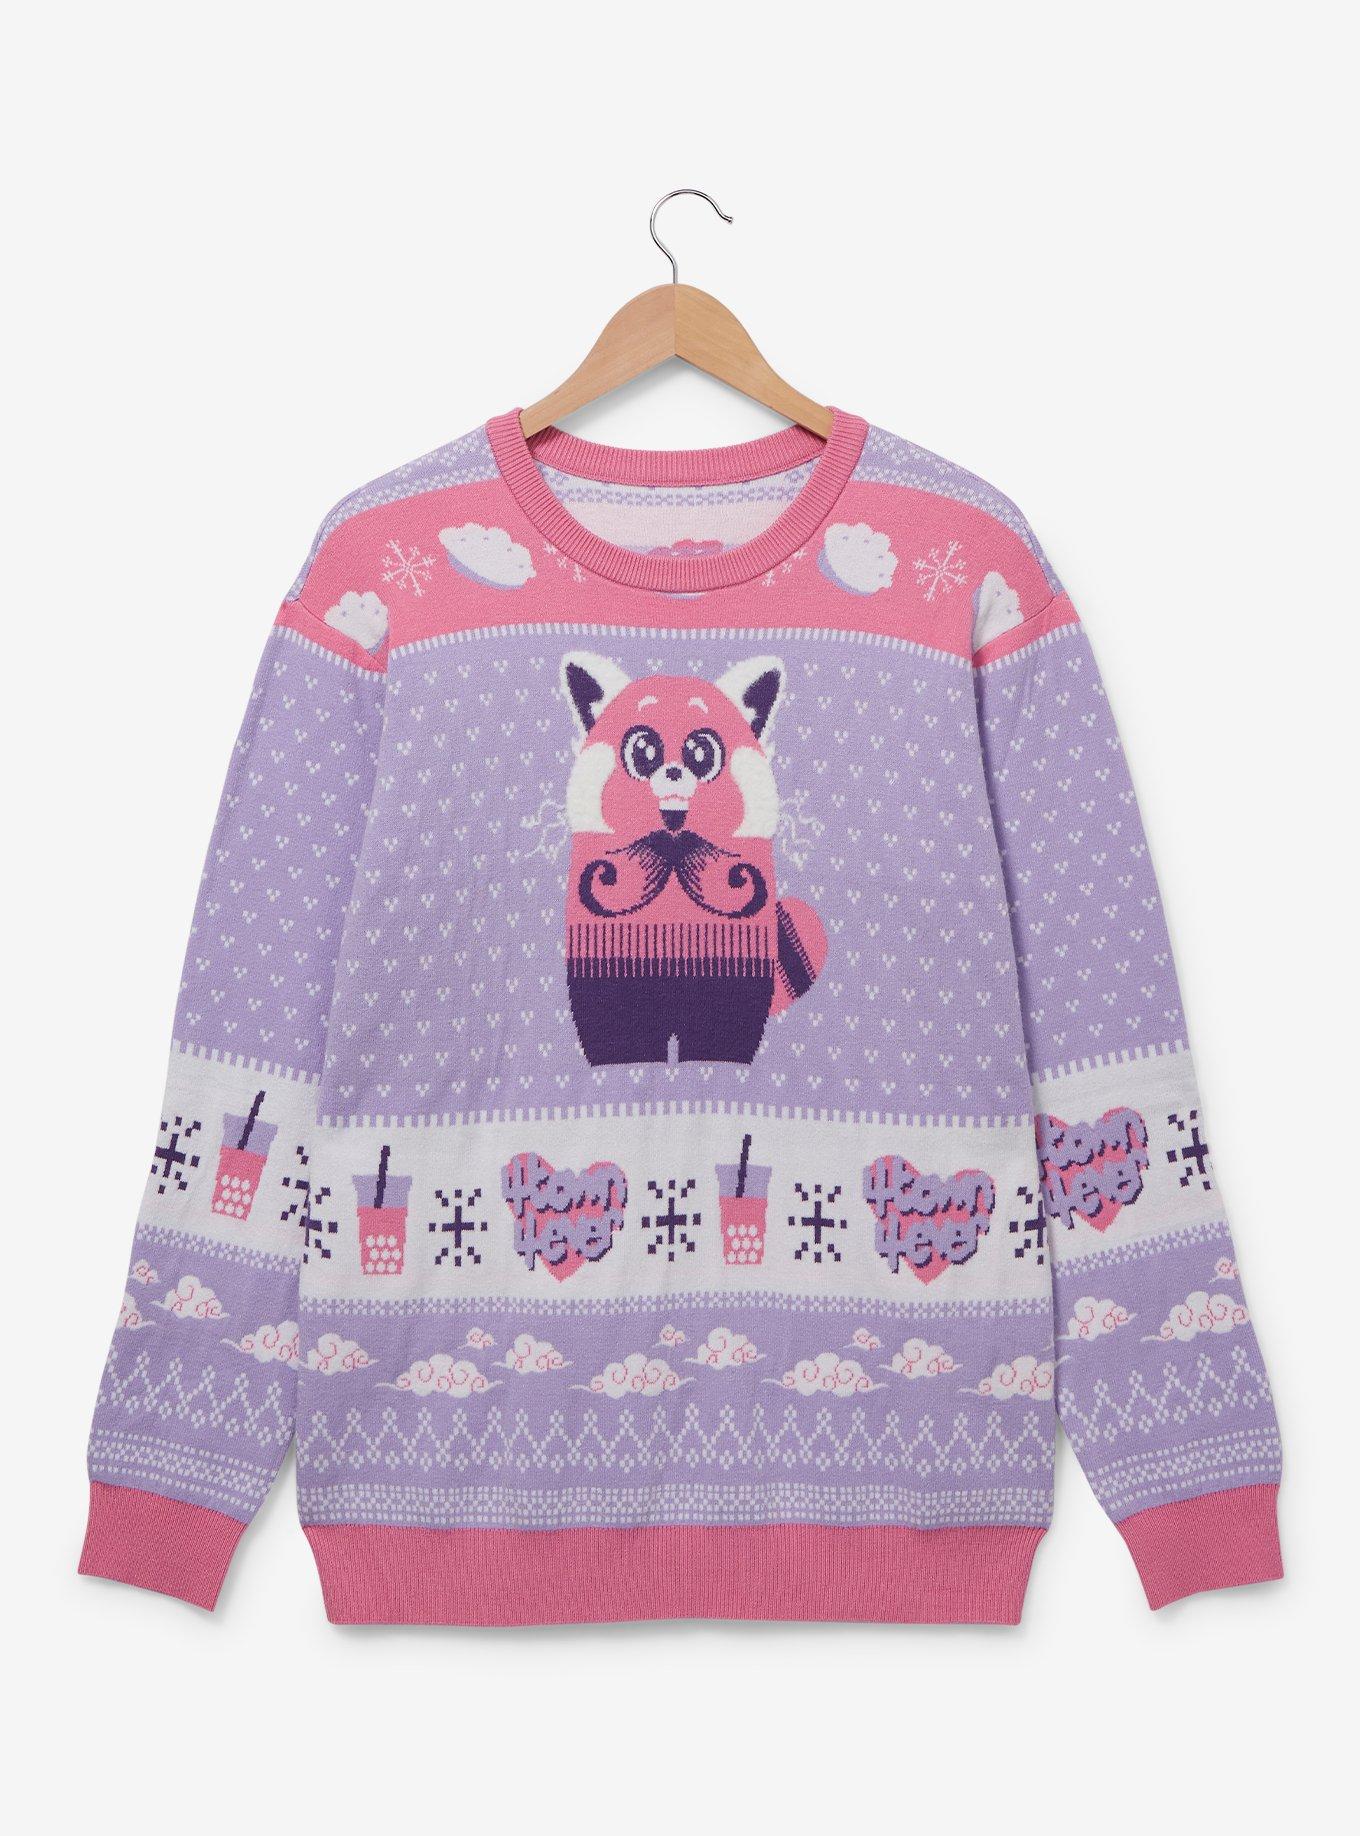 Disney Pixar Turning Red Mei Red Panda Holiday Sweater - BoxLunch Exclusive, LILAC, hi-res